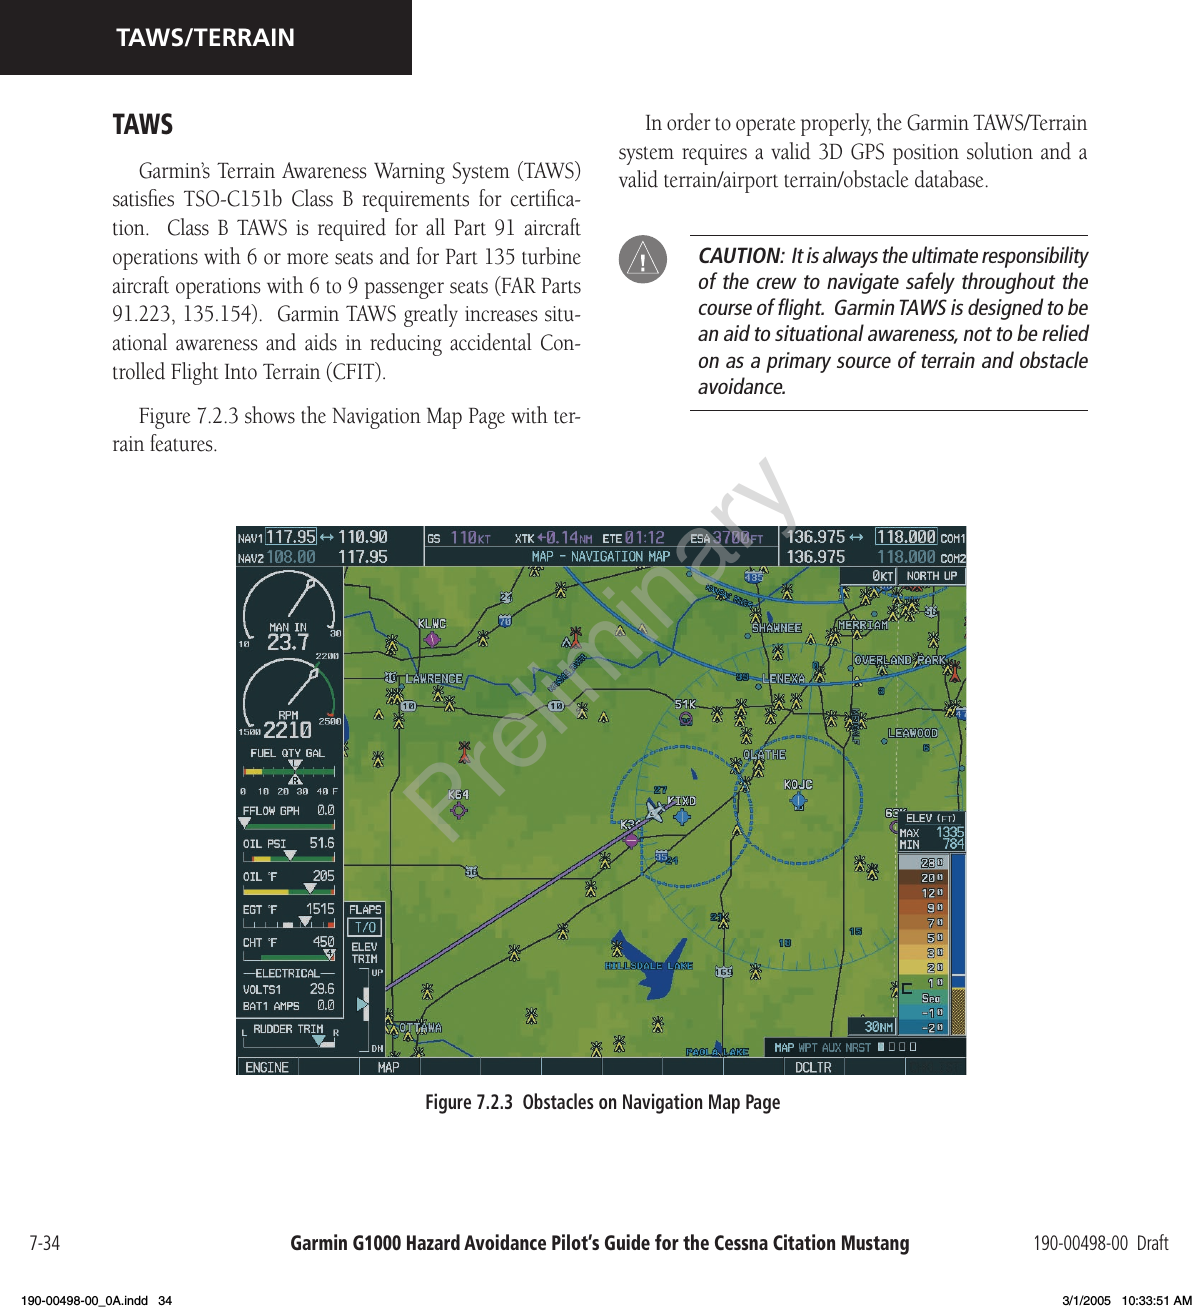 Garmin G1000 Hazard Avoidance Pilot’s Guide for the Cessna Citation Mustang 190-00498-00  Draft7-34TAWS/TERRAINTAWSGarmin’s Terrain Awareness Warning System (TAWS) satisﬁes  TSO-C151b  Class  B  requirements  for  certiﬁca-tion.    Class  B  TAWS  is  required  for  all  Part  91  aircraft operations with 6 or more seats and for Part 135 turbine aircraft operations with 6 to 9 passenger seats (FAR Parts 91.223, 135.154).  Garmin TAWS greatly increases situ-ational  awareness  and  aids  in  reducing  accidental  Con-trolled Flight Into Terrain (CFIT).Figure 7.2.3 shows the Navigation Map Page with ter-rain features.In order to operate properly, the Garmin TAWS/Terrain system requires a  valid  3D GPS  position solution  and  a valid terrain/airport terrain/obstacle database.  CAUTION:  It is always the ultimate responsibility of the crew to navigate safely throughout the course of ﬂight.  Garmin TAWS is designed to be an aid to situational awareness, not to be relied on as a primary source of terrain and obstacle avoidance.Figure 7.2.3  Obstacles on Navigation Map PagePreliminary190-00498-00_0A.indd   34 3/1/2005   10:33:51 AM